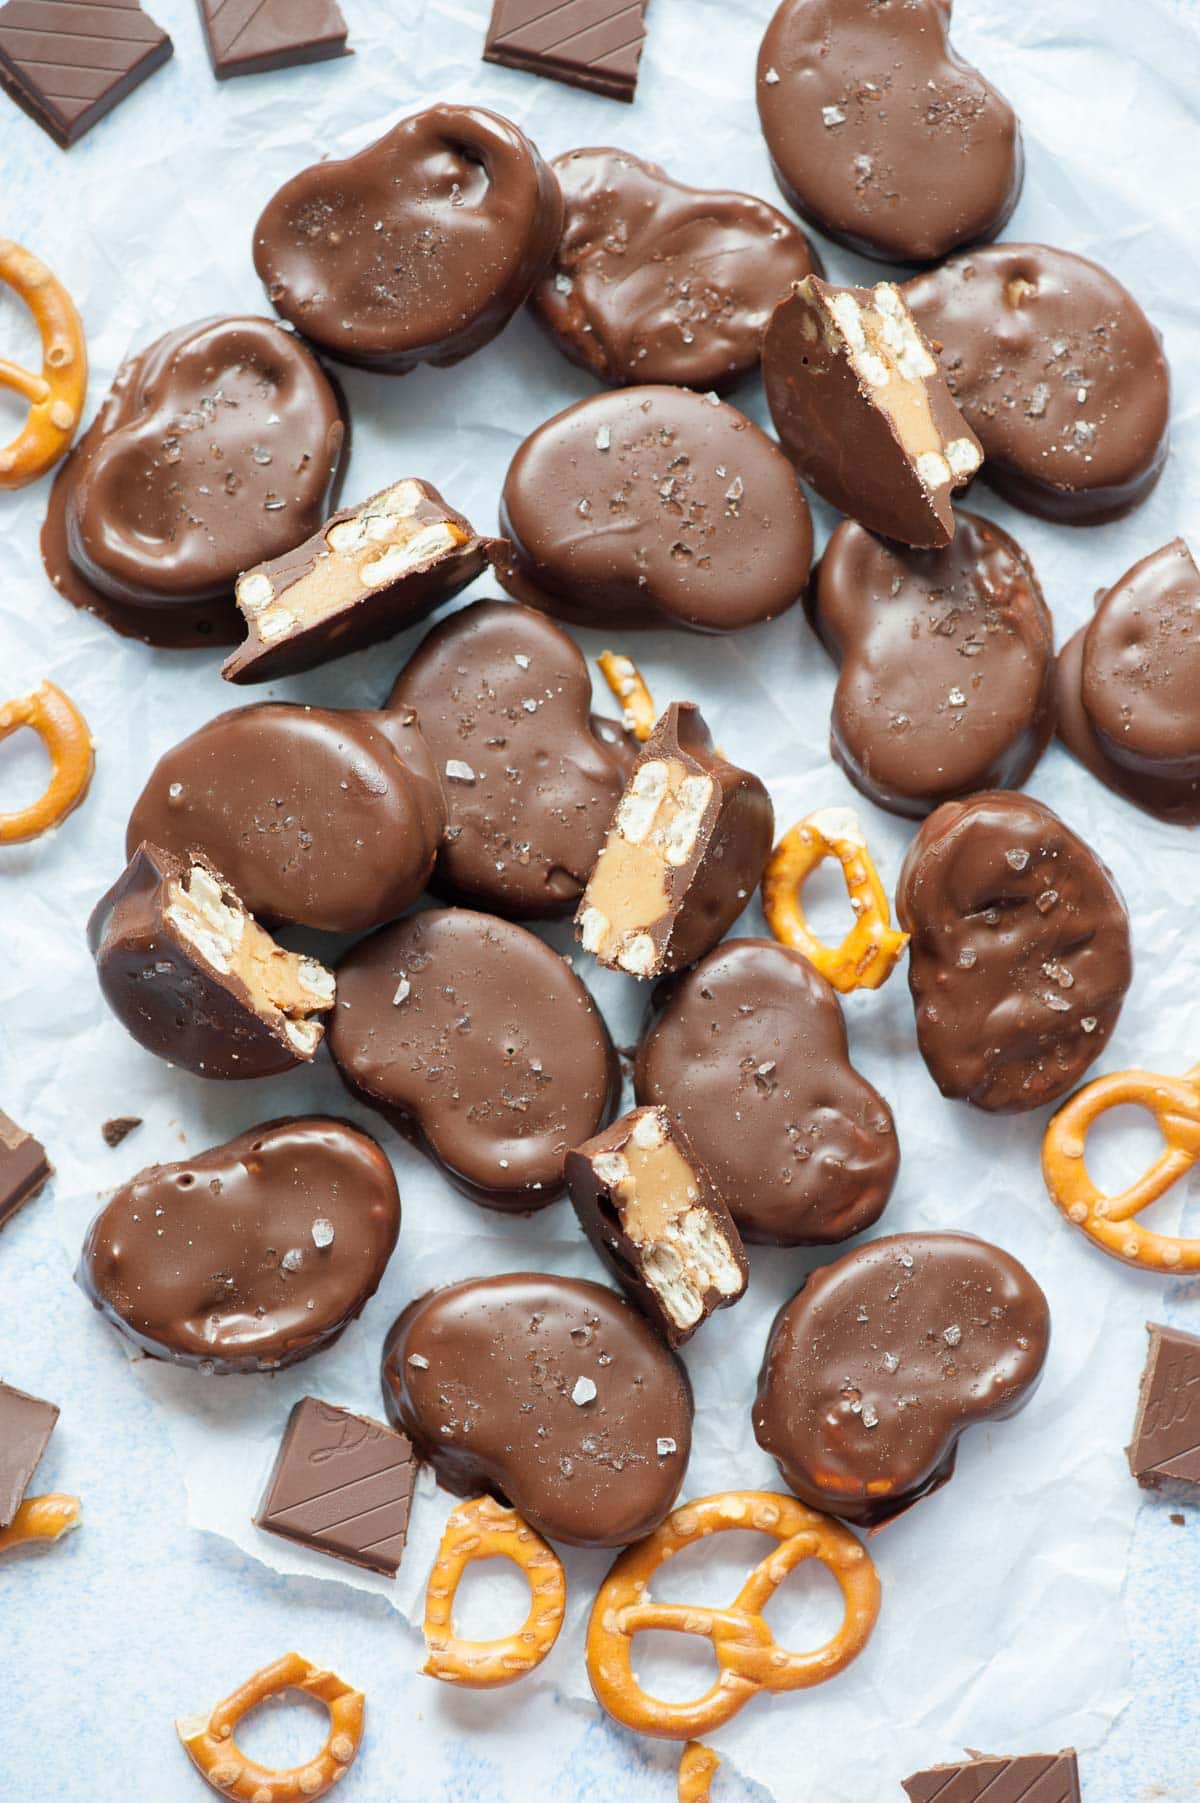 https://www.everyday-delicious.com/wp-content/uploads/2021/07/chocolate-peanut-butter-pretzels-everyday-delicious-2.jpg